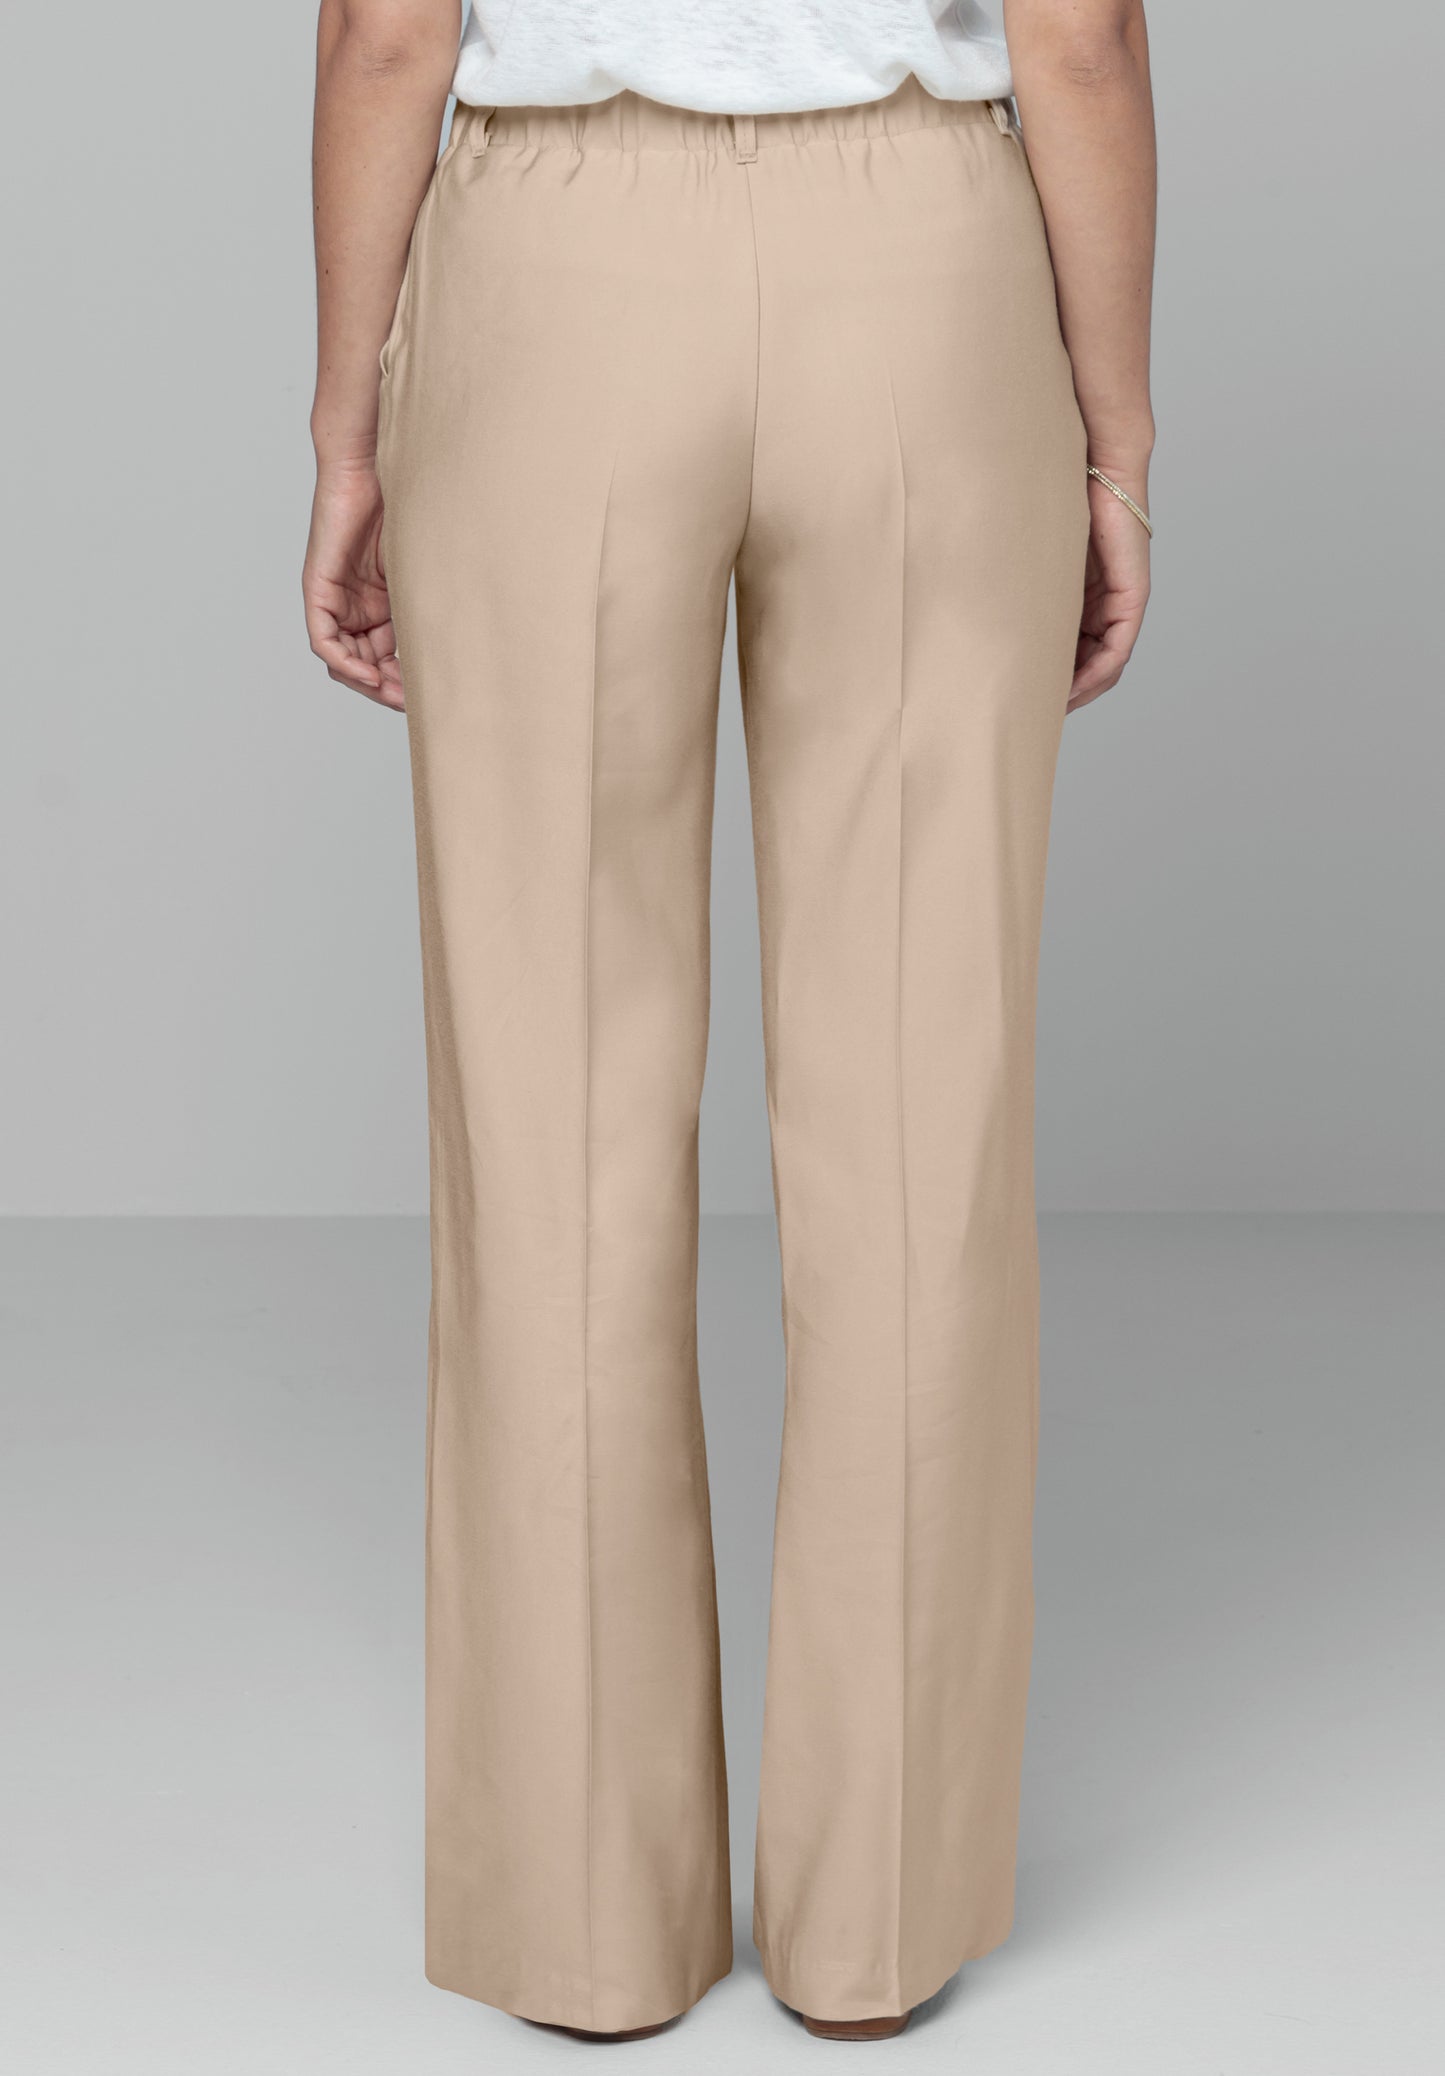 BIANCA Bisque Straight Leg Trousers